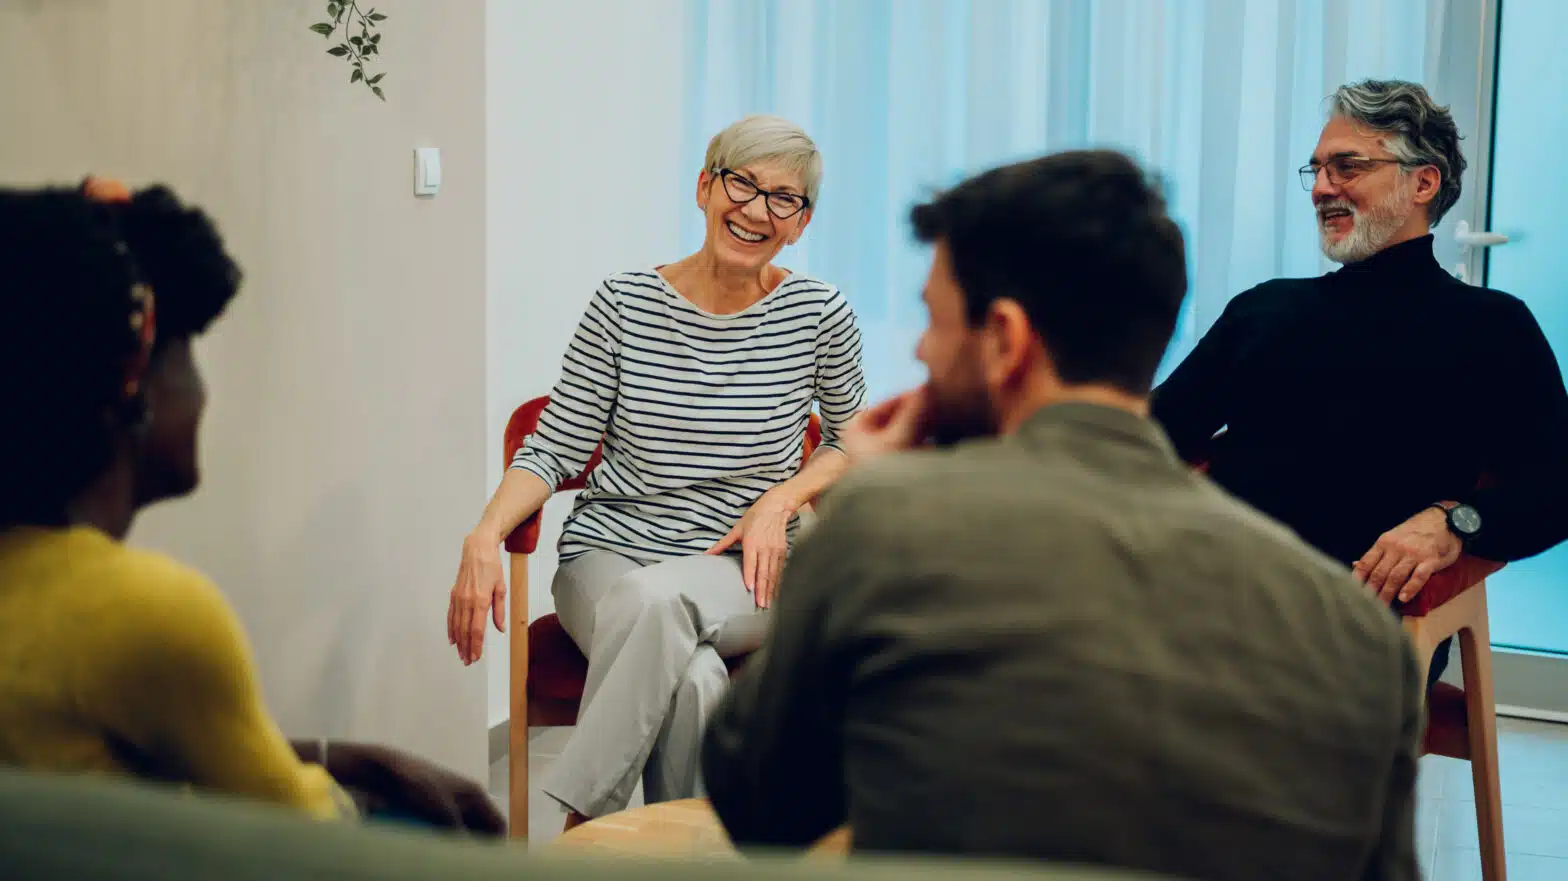 People laugh in a group therapy session - What To Expect In A Typical Day In Drug Rehab